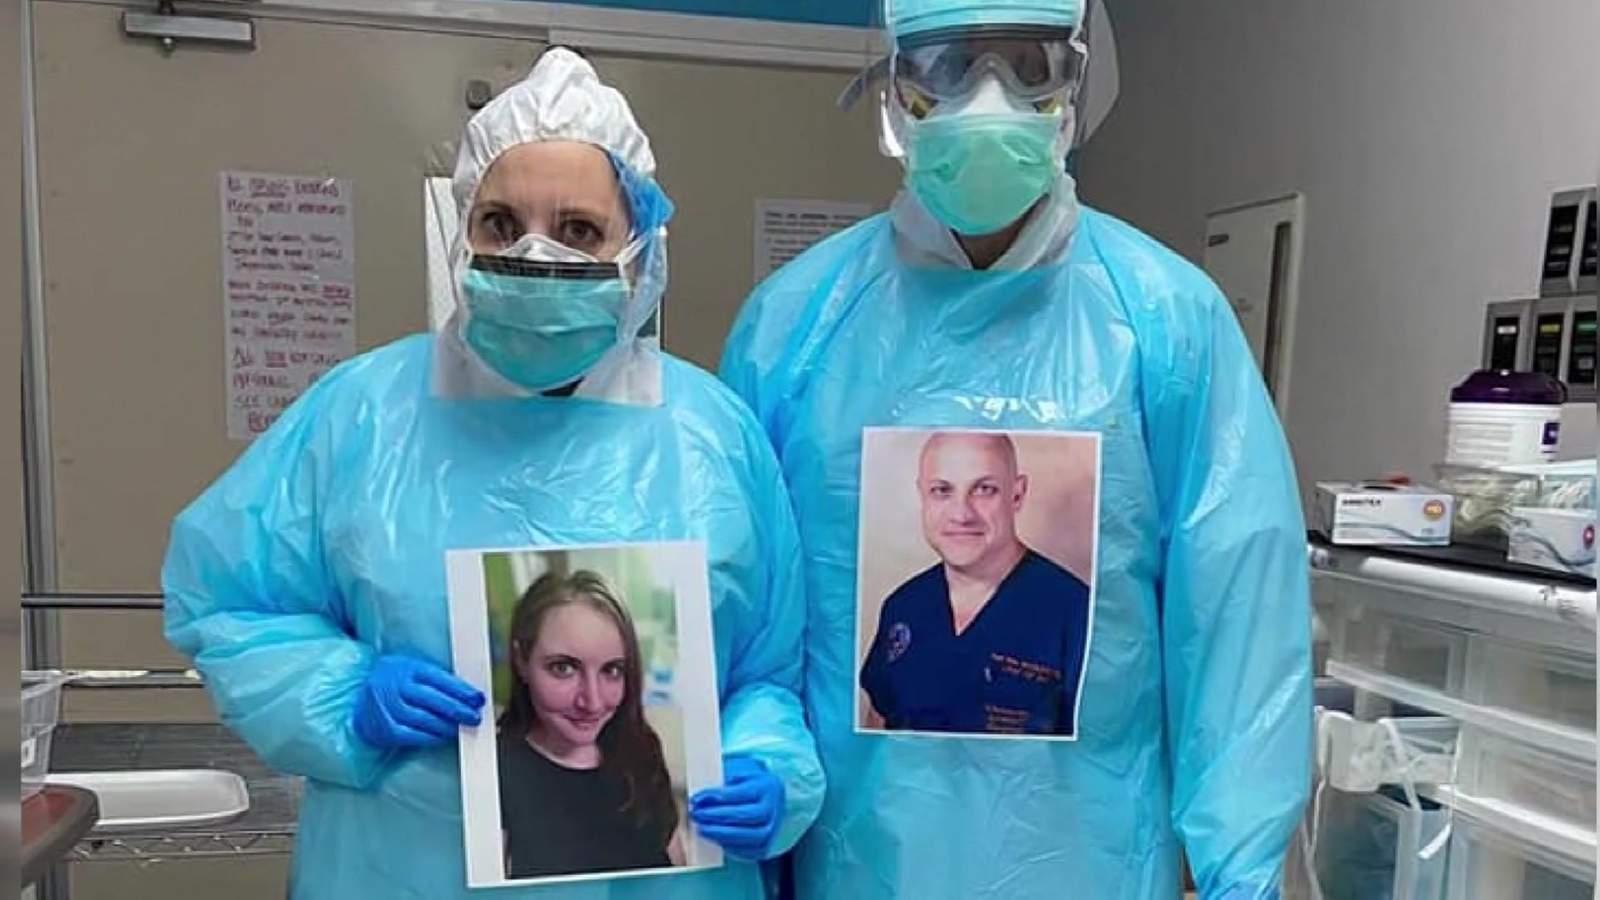 'Make them smile’: Houston doctor gives hope, humor while treating coronavirus patients